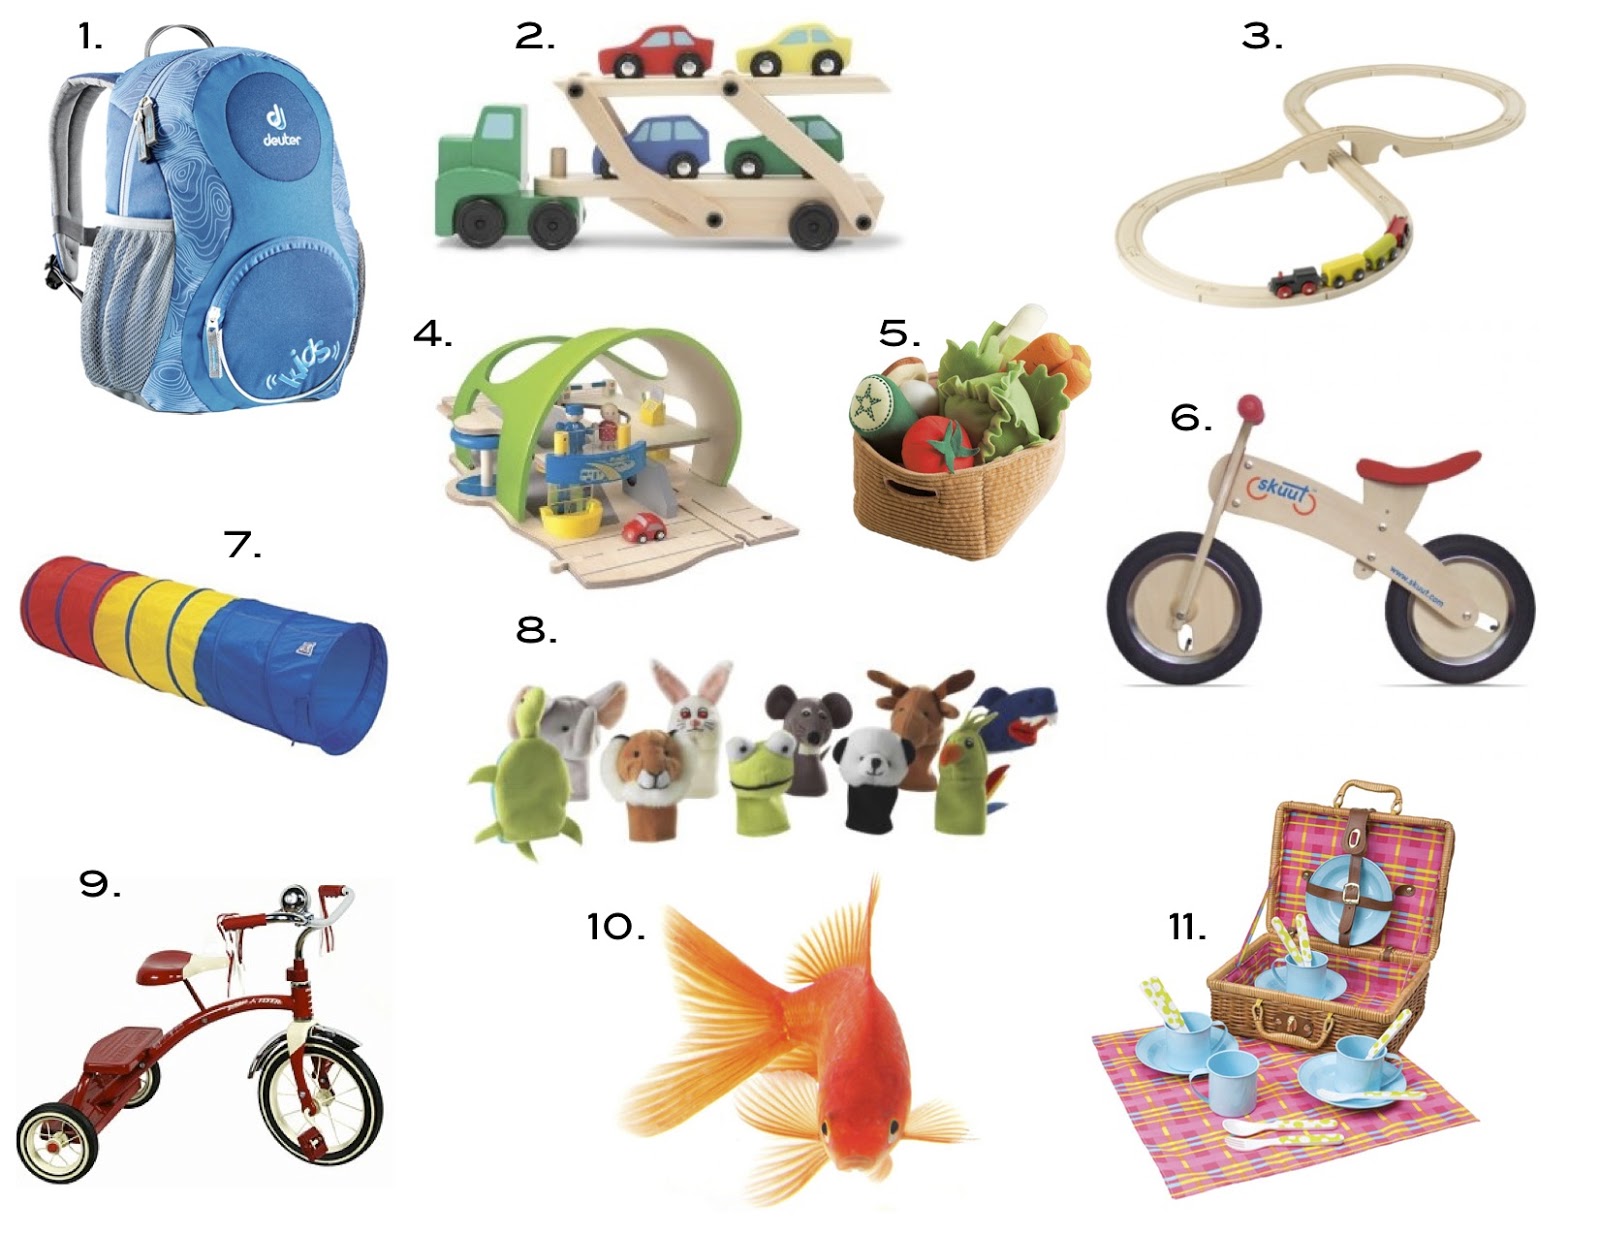 24 Ideas for 4 Year Old Birthday Gift Ideas Home, Family, Style and